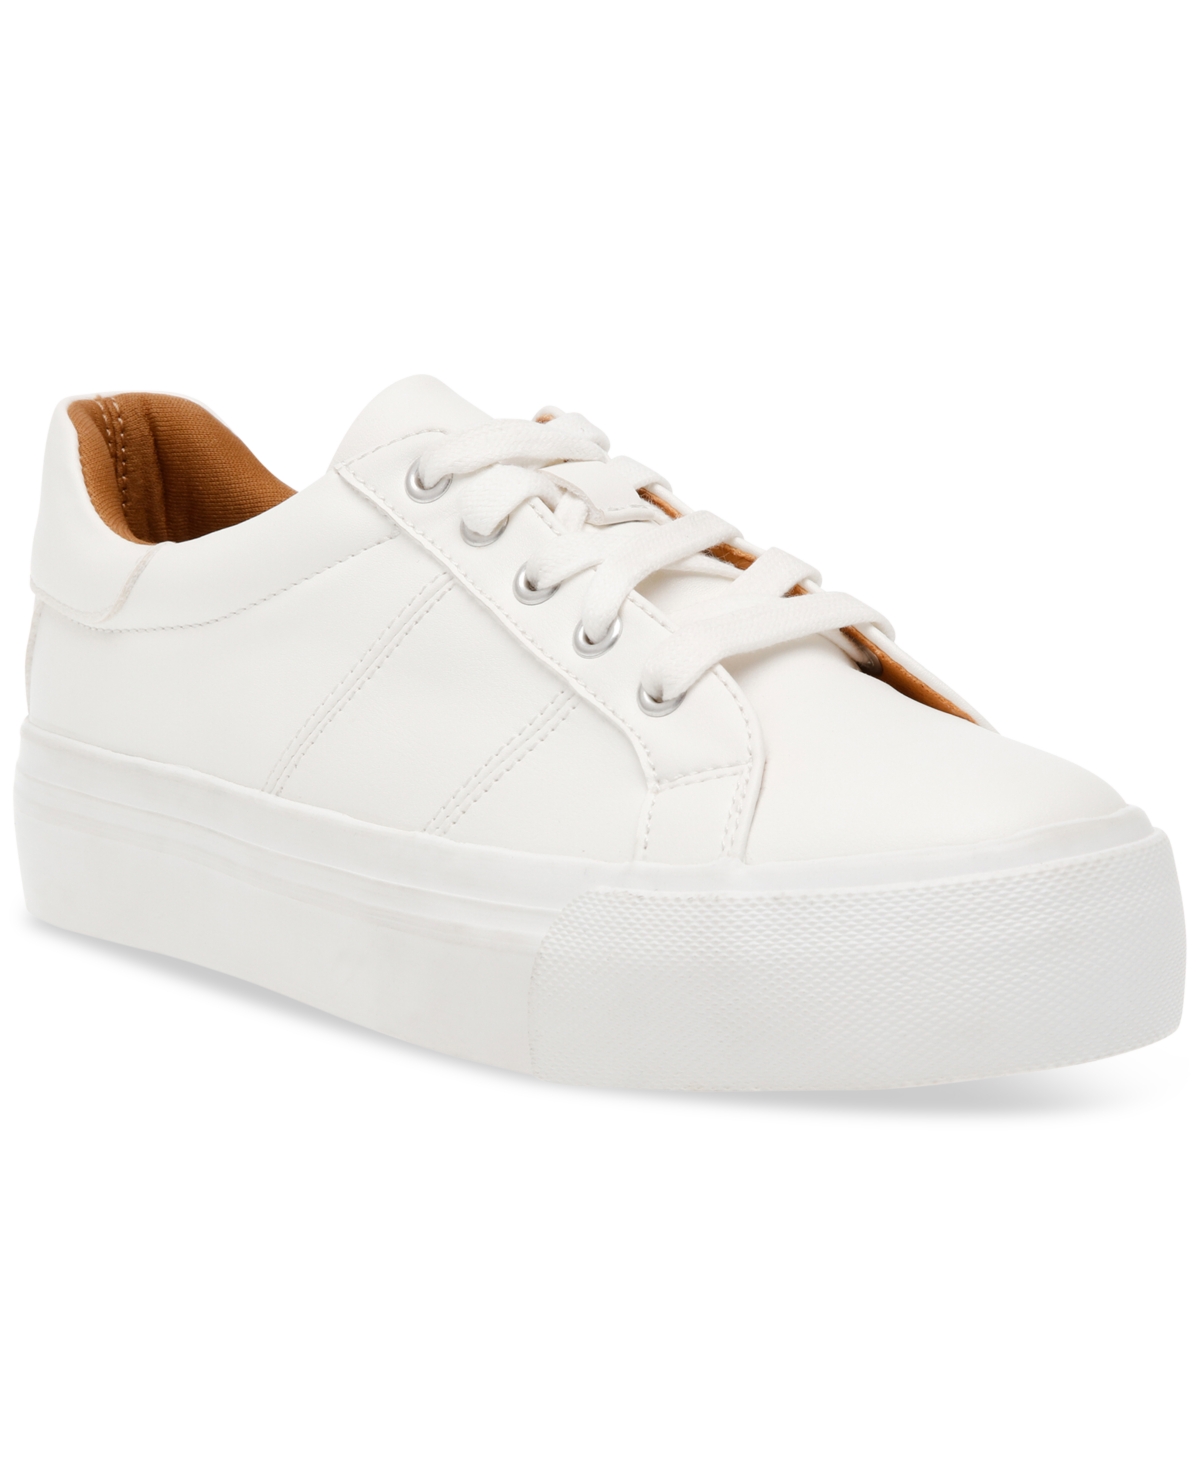 Women's Vent Platform Lace-Up Sneakers - White